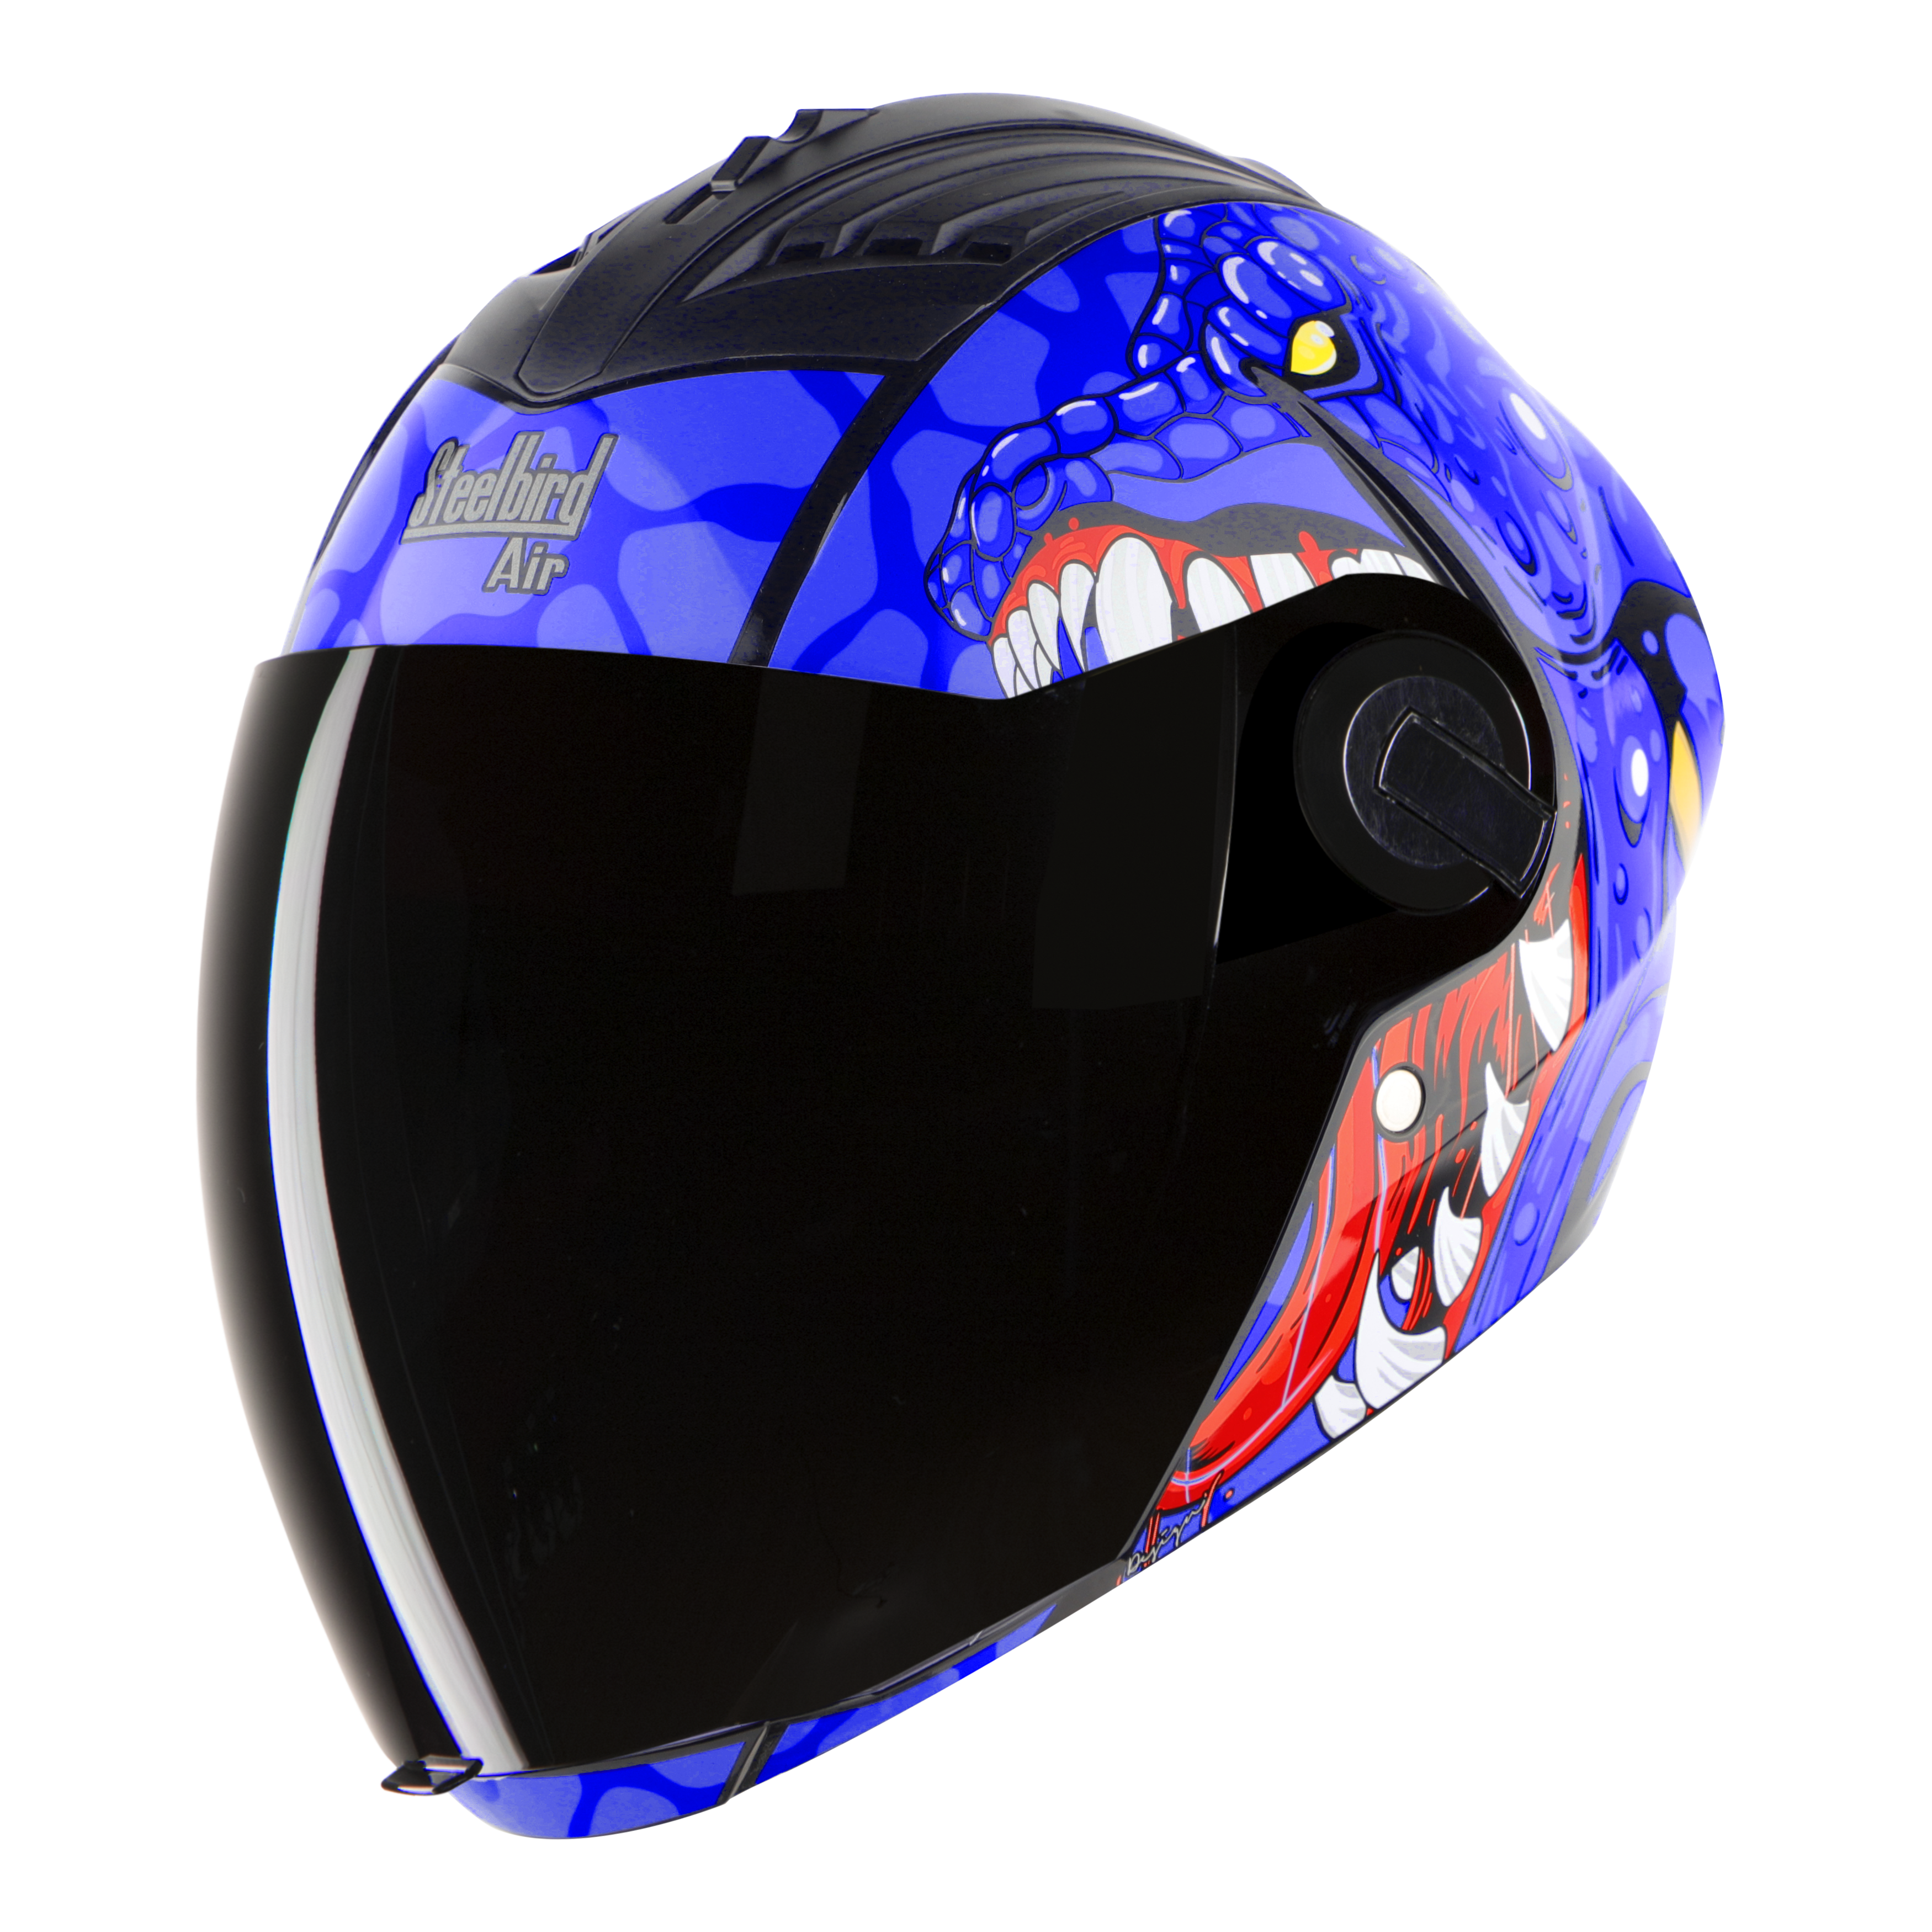 SBA-2 DRAGON GLOSSY BLACK WITH BLUE (FITTED WITH CLEAR VISOR EXTRA SMOKE VISOR FREE)